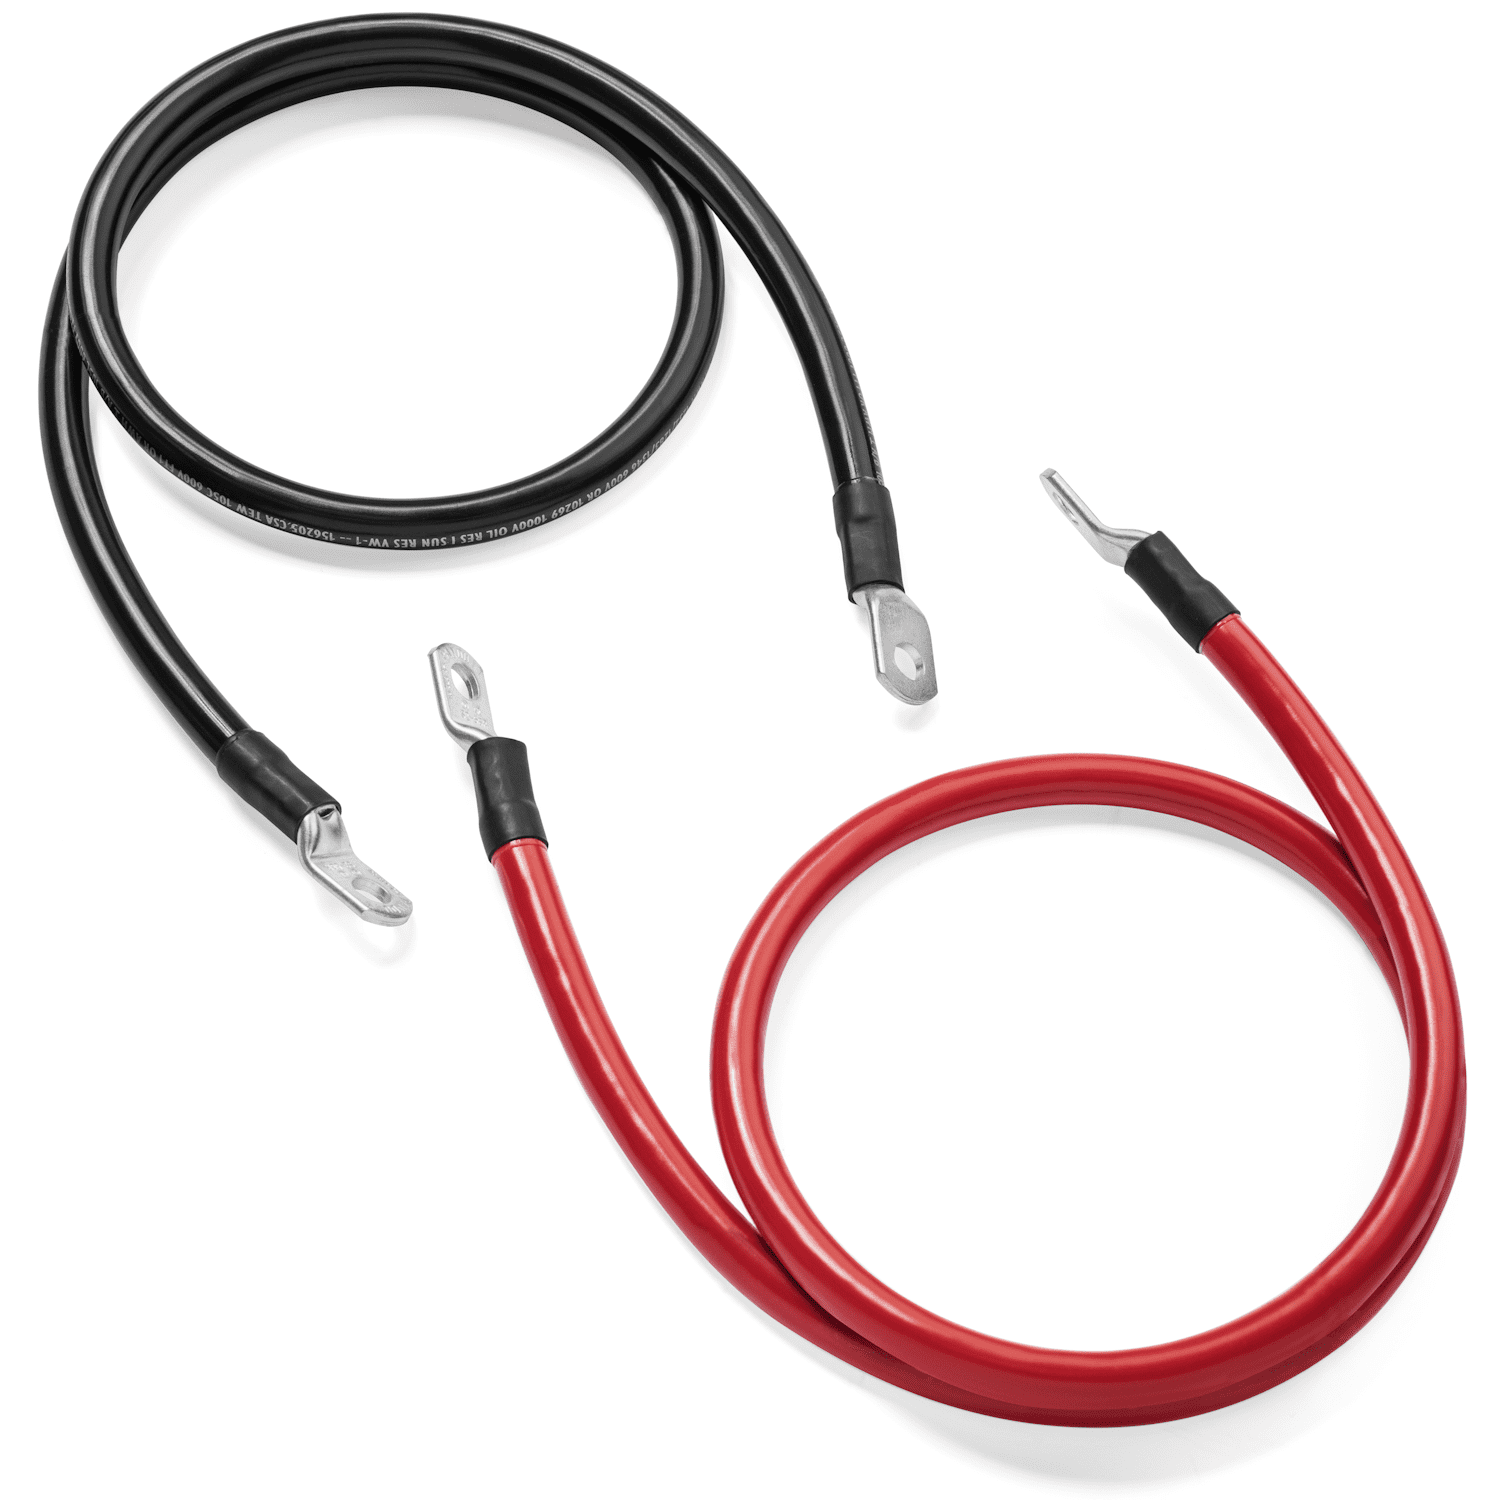 Black 2 Foot 4/0 AWG Battery Cable by Spartan Power 0000 Gauge Negative Only 2 FT 5/16 Ring Terminals 